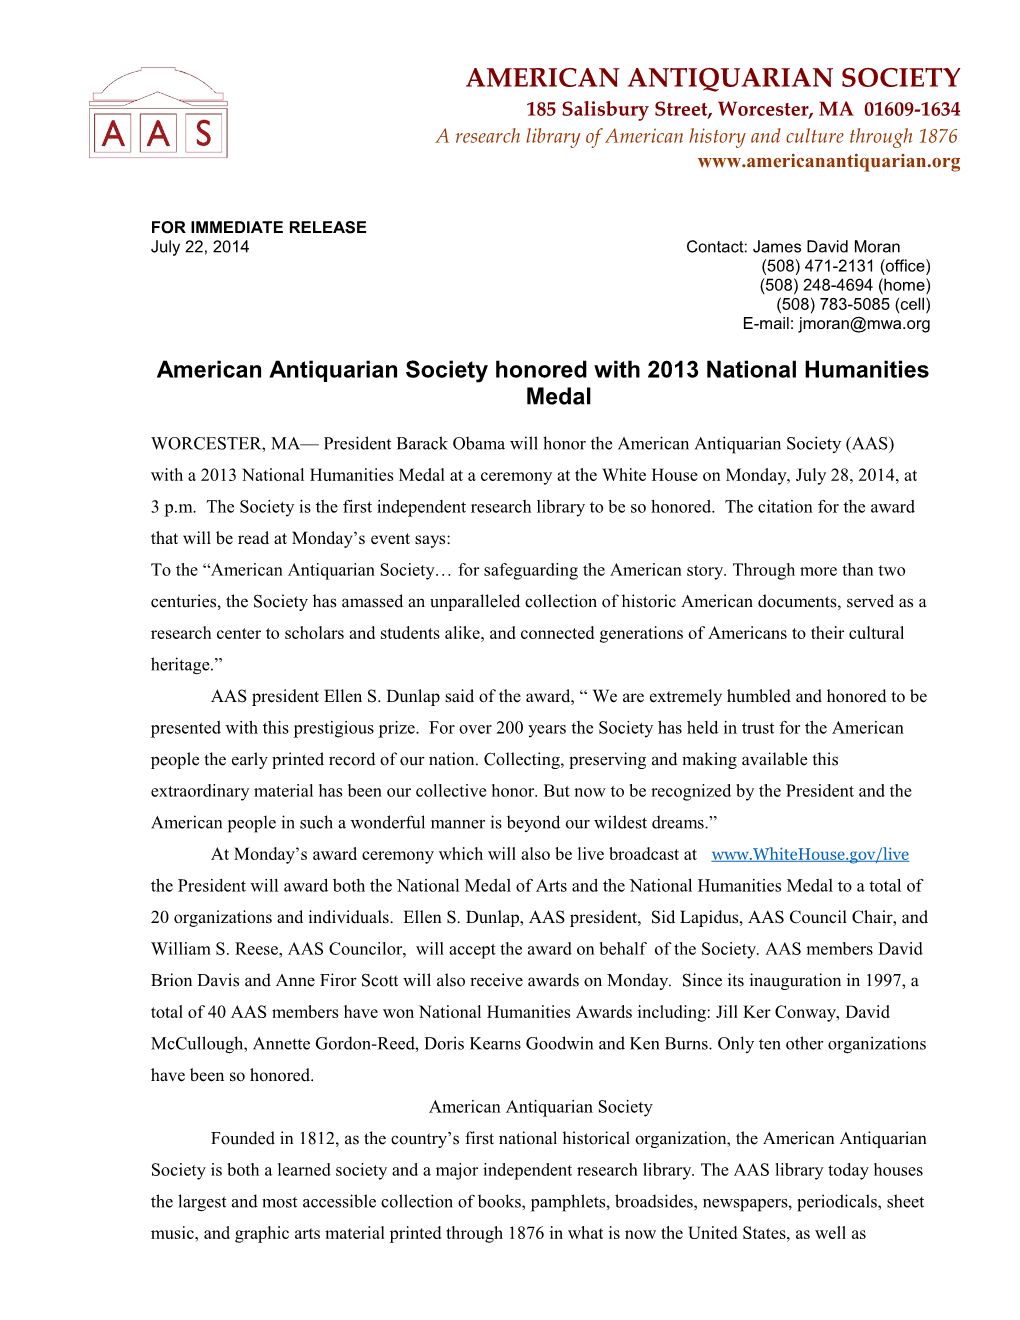 AAS 2013 National Humanities Award (Continued) Page 2 of 2